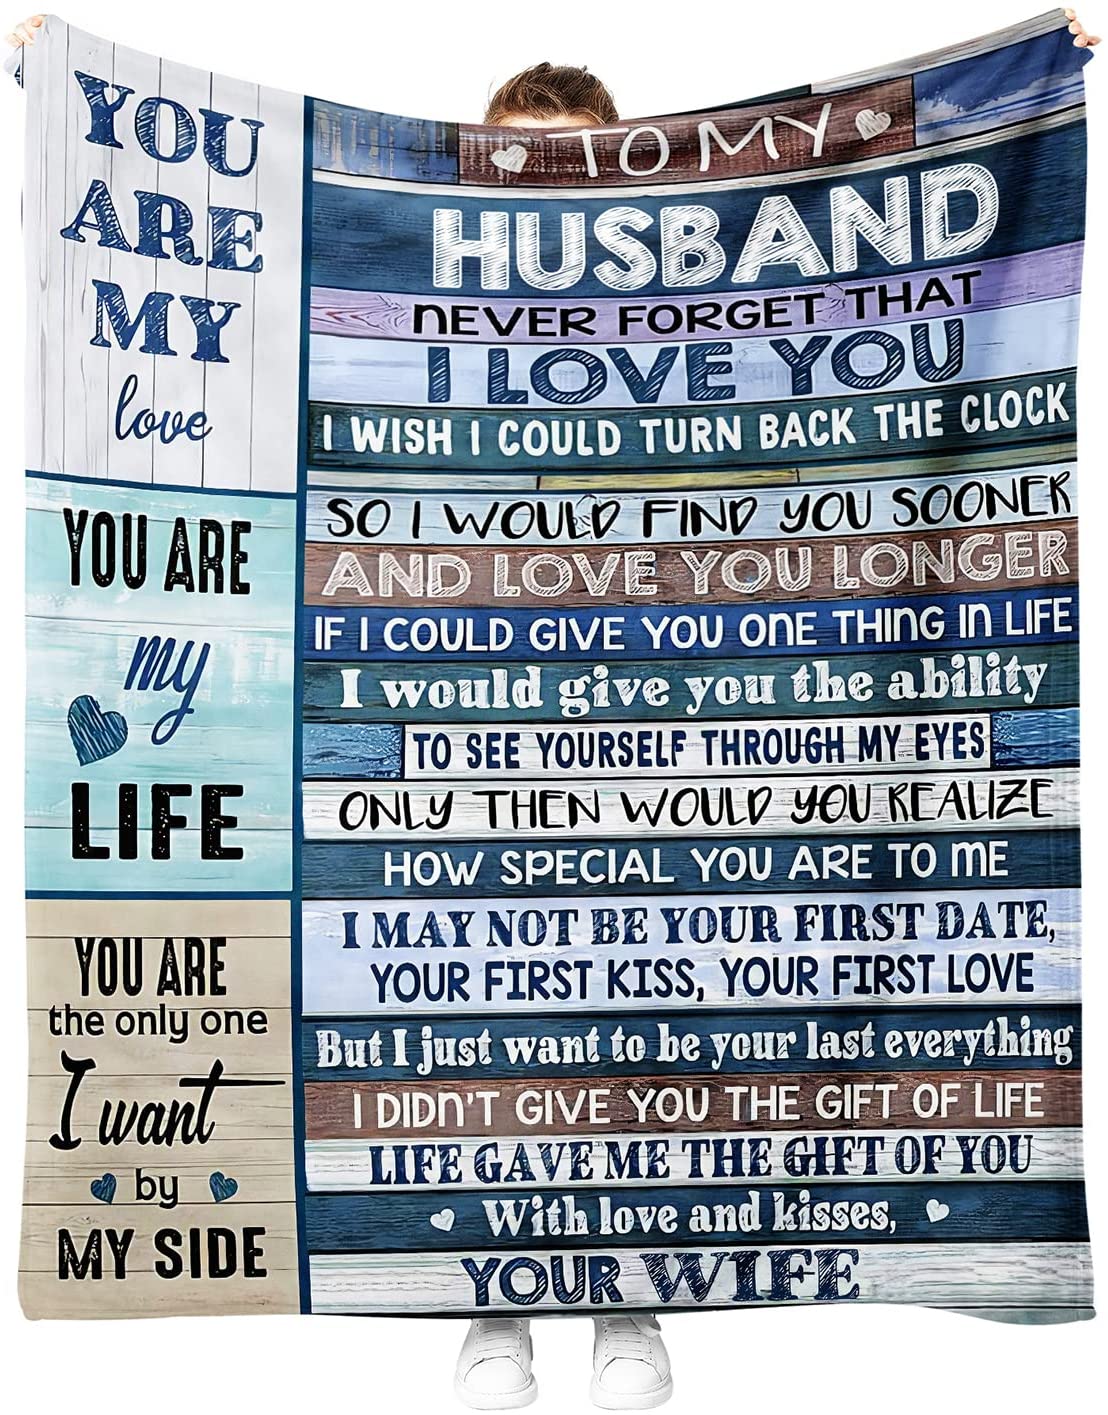 Gifts For Husband Blanket - You Are My Love, To My Husband Blanket - Gifts From Wife, Romantic Valentine, Anniversary, Birthday, Wedding, Christmas, Wedding Anniversary, Valentine's Day - Gift For Him Flannel Throw Blanket